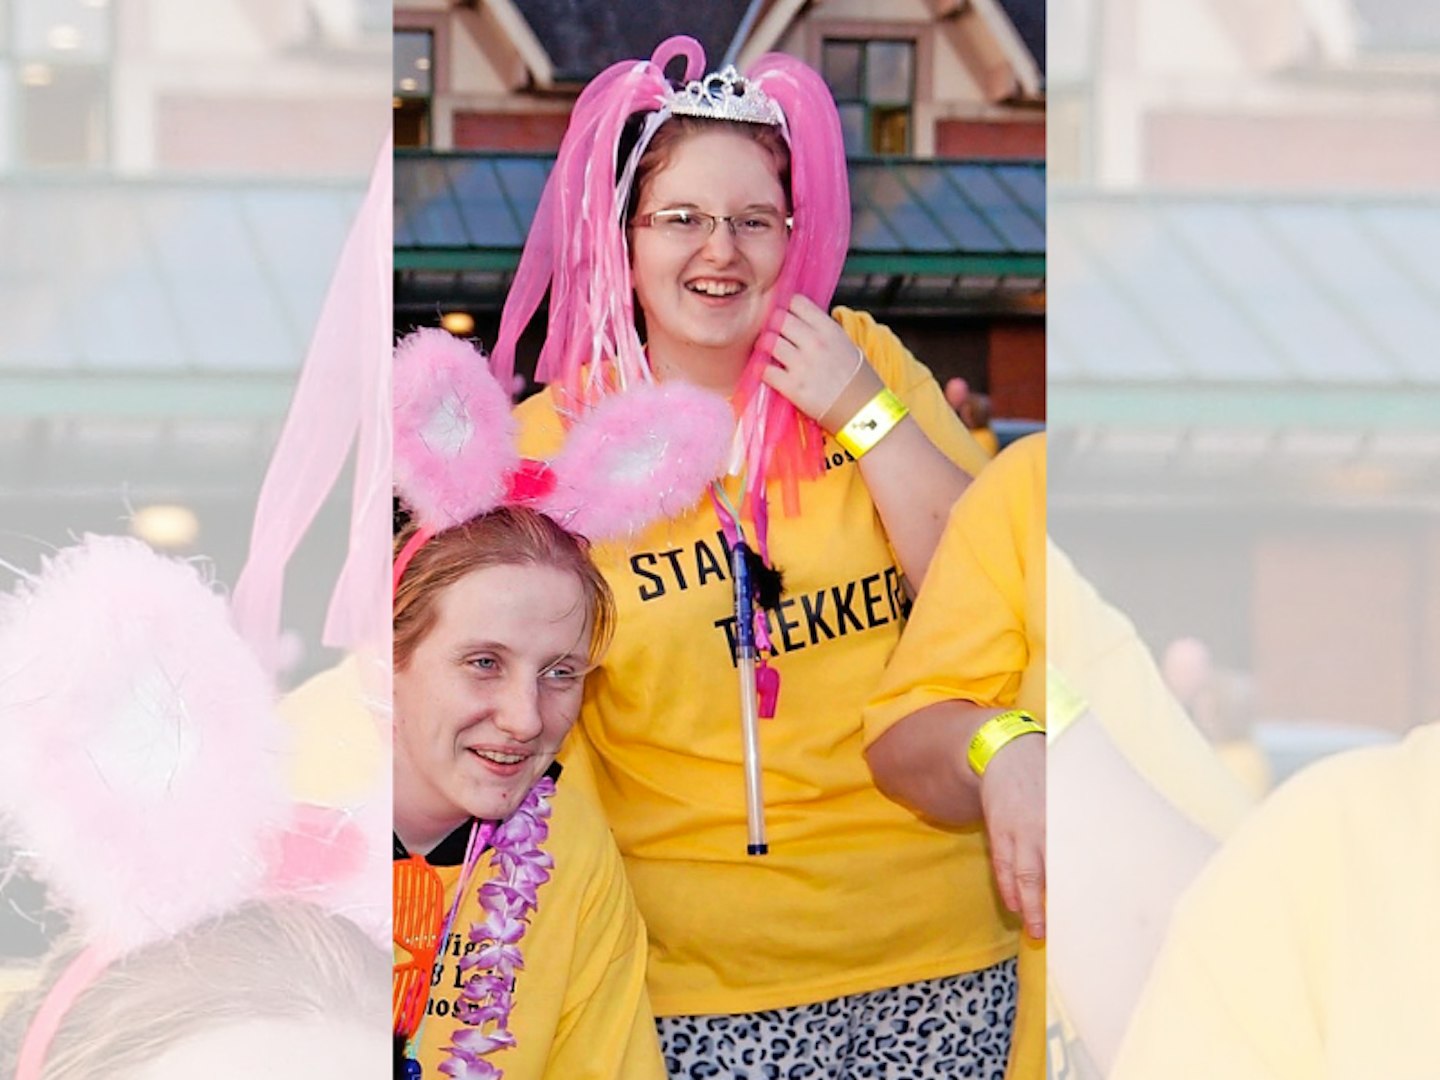 Woman with pink headress and yellow T-shirt